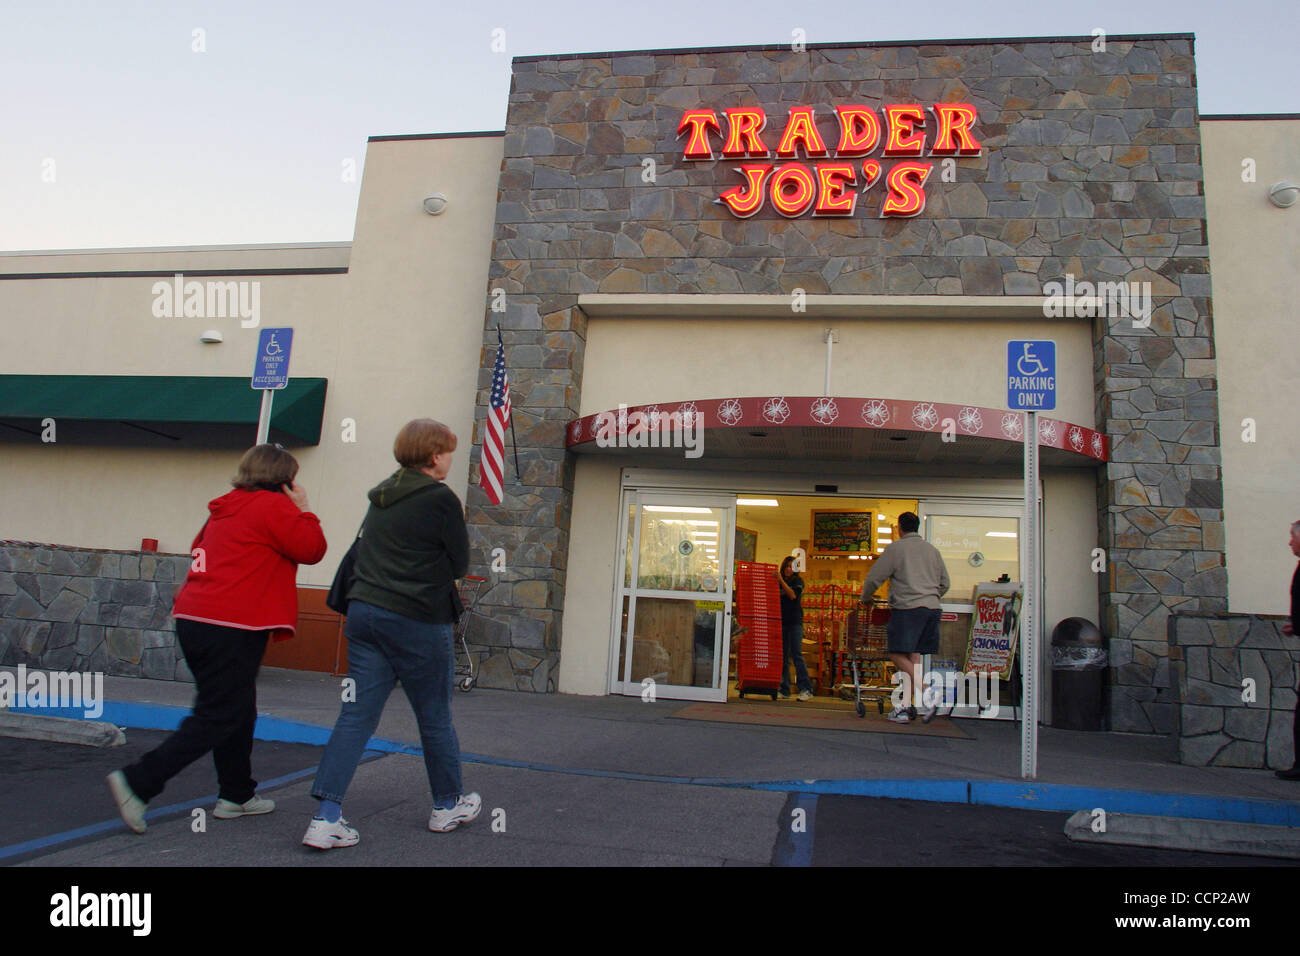 Jan 05, 2004; Laguna Hills, CA, USA; Trader Joe's, the specialty grocery store known for its bargains on wines and gourmet items, store in S. Orange County. Trader Joes was long the 'dream grocer' of yuppies looking for exotic cheeses, organic flour and 7 grain bread, but the cramped stores now offe Stock Photo